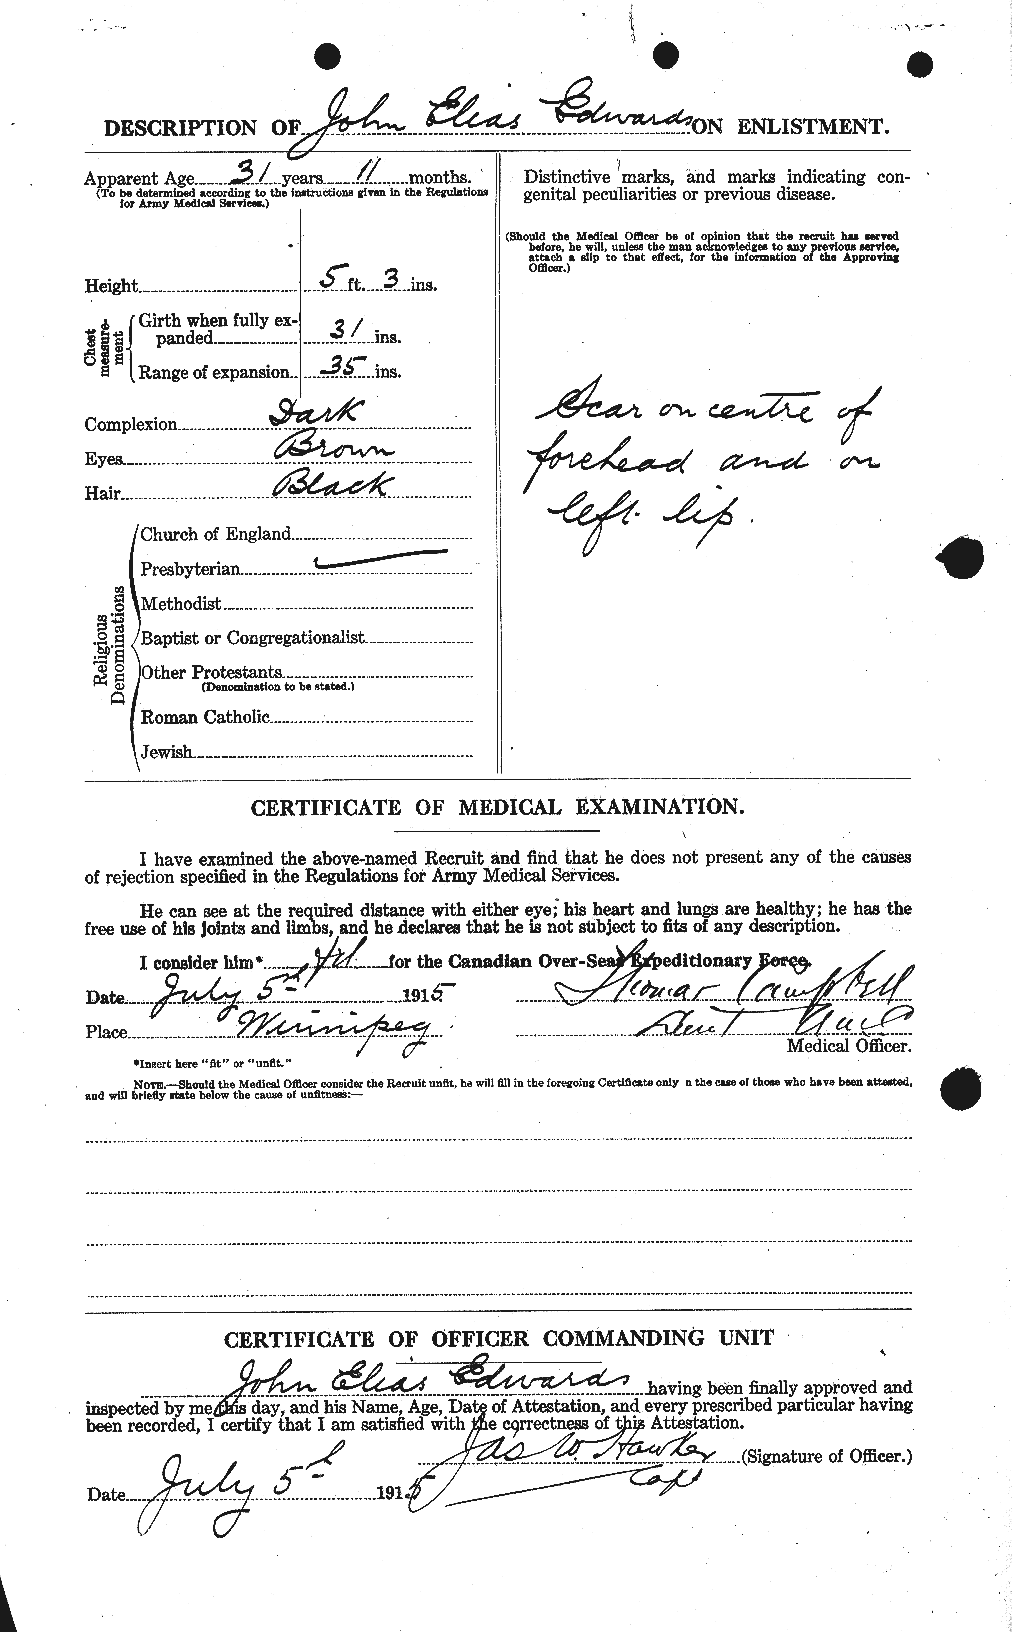 Personnel Records of the First World War - CEF 310128b